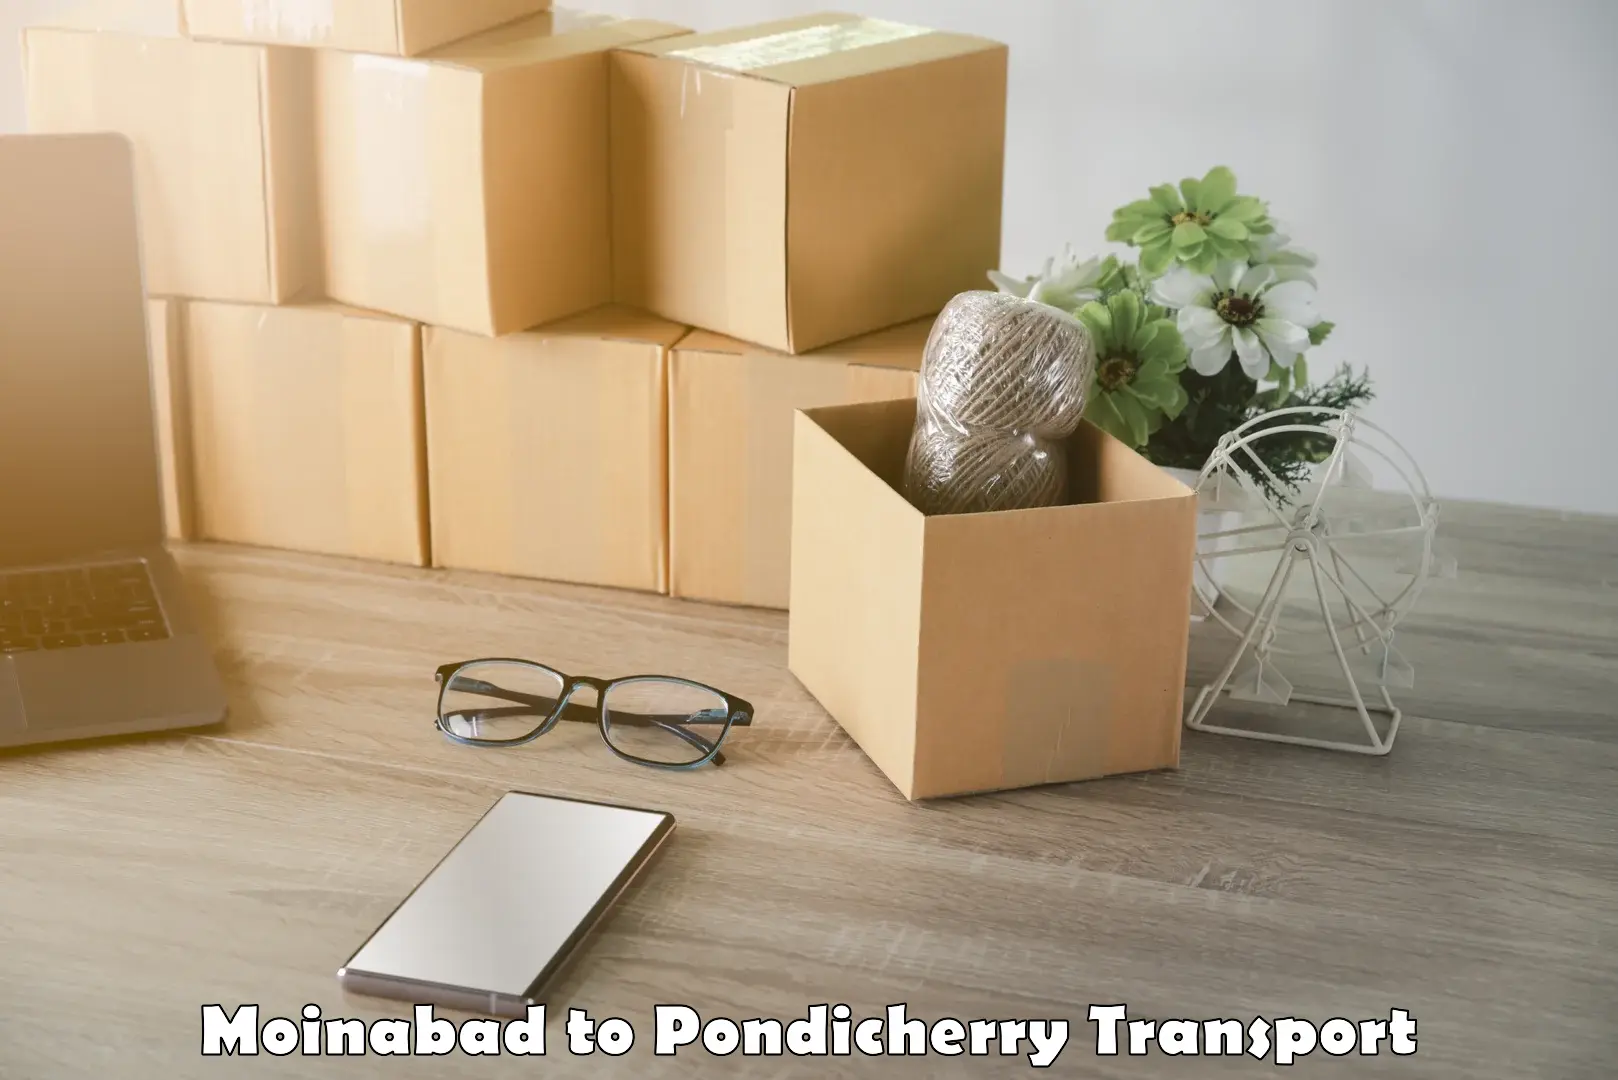 Online transport service Moinabad to Pondicherry